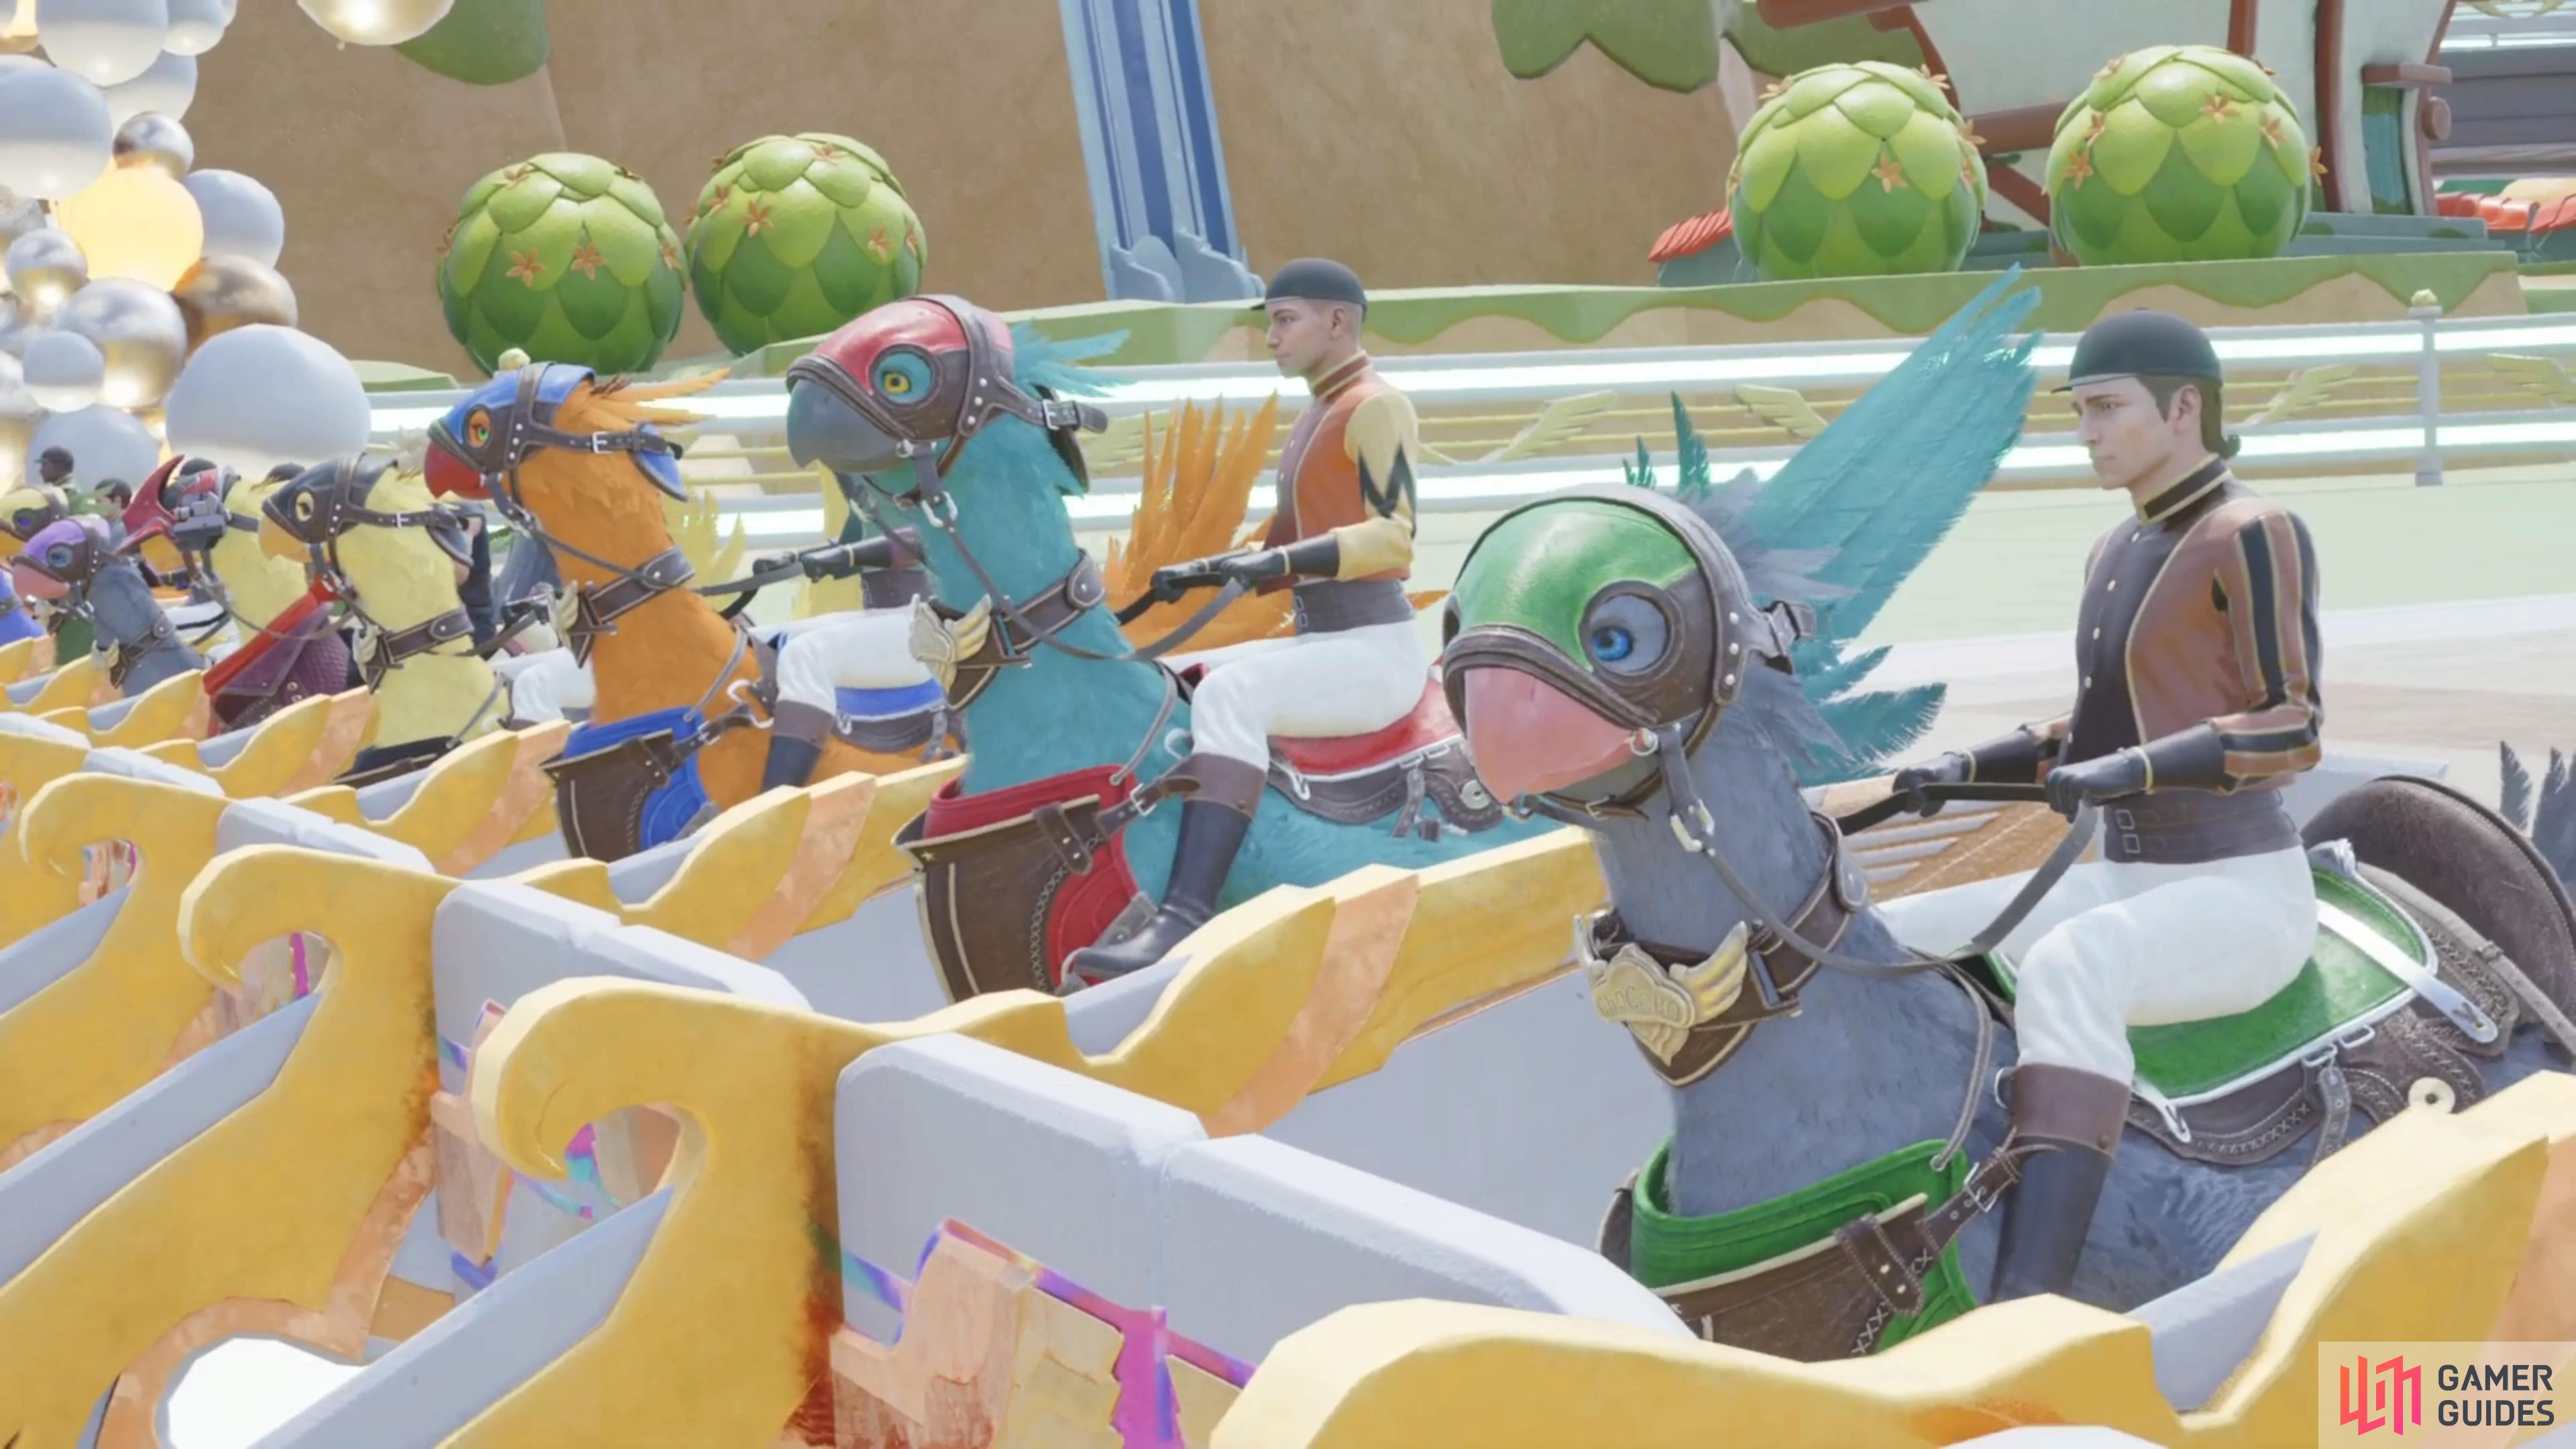 Chocobo Racing is a full-blown minigame that is plenty of fun!